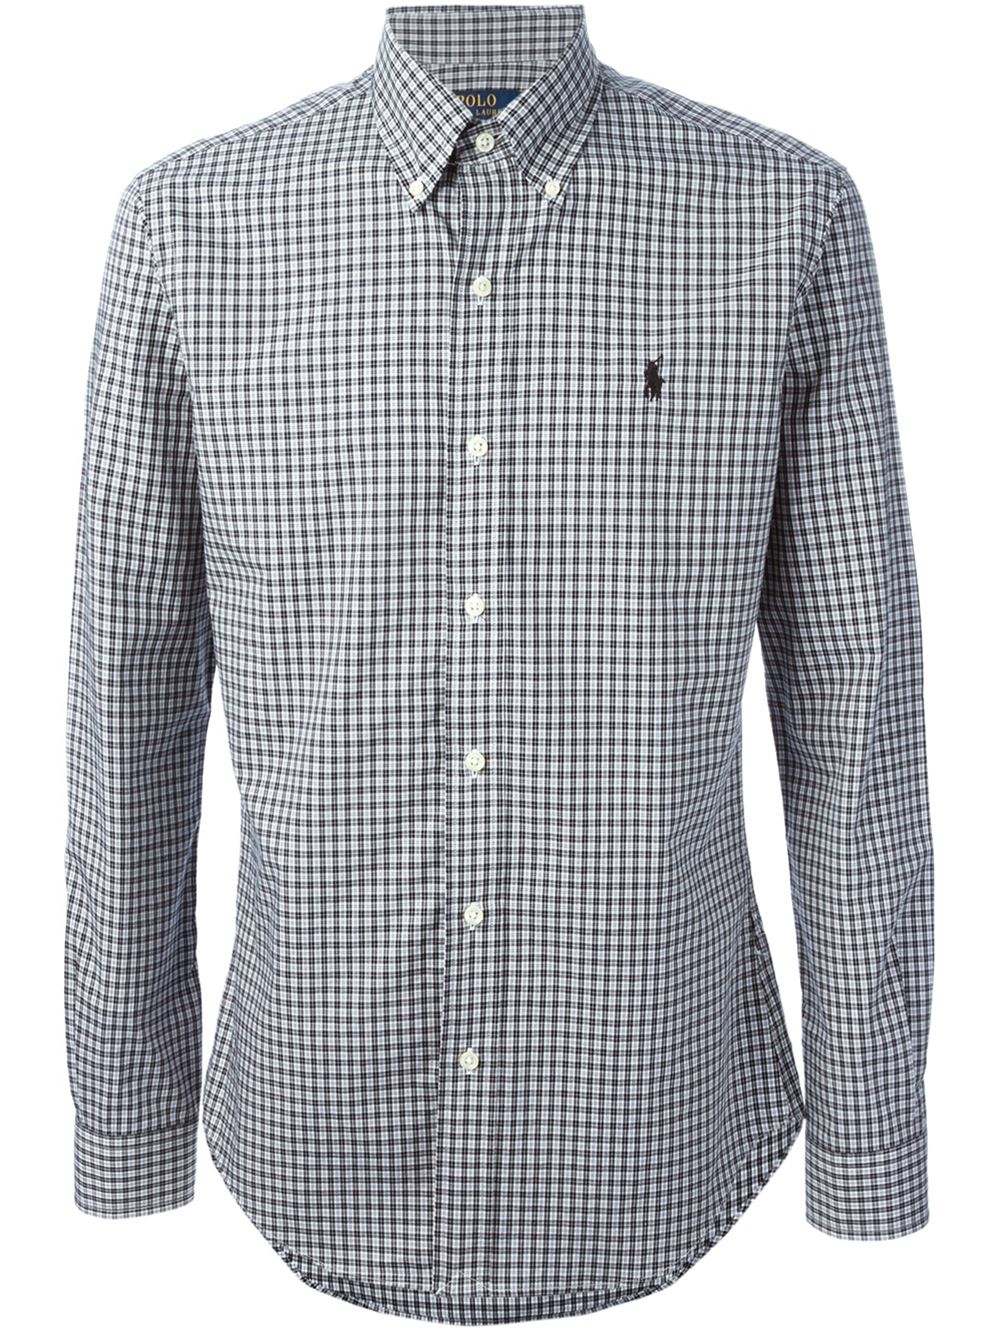 Lyst - Polo Ralph Lauren Checked Button Down Shirt in Black for Men